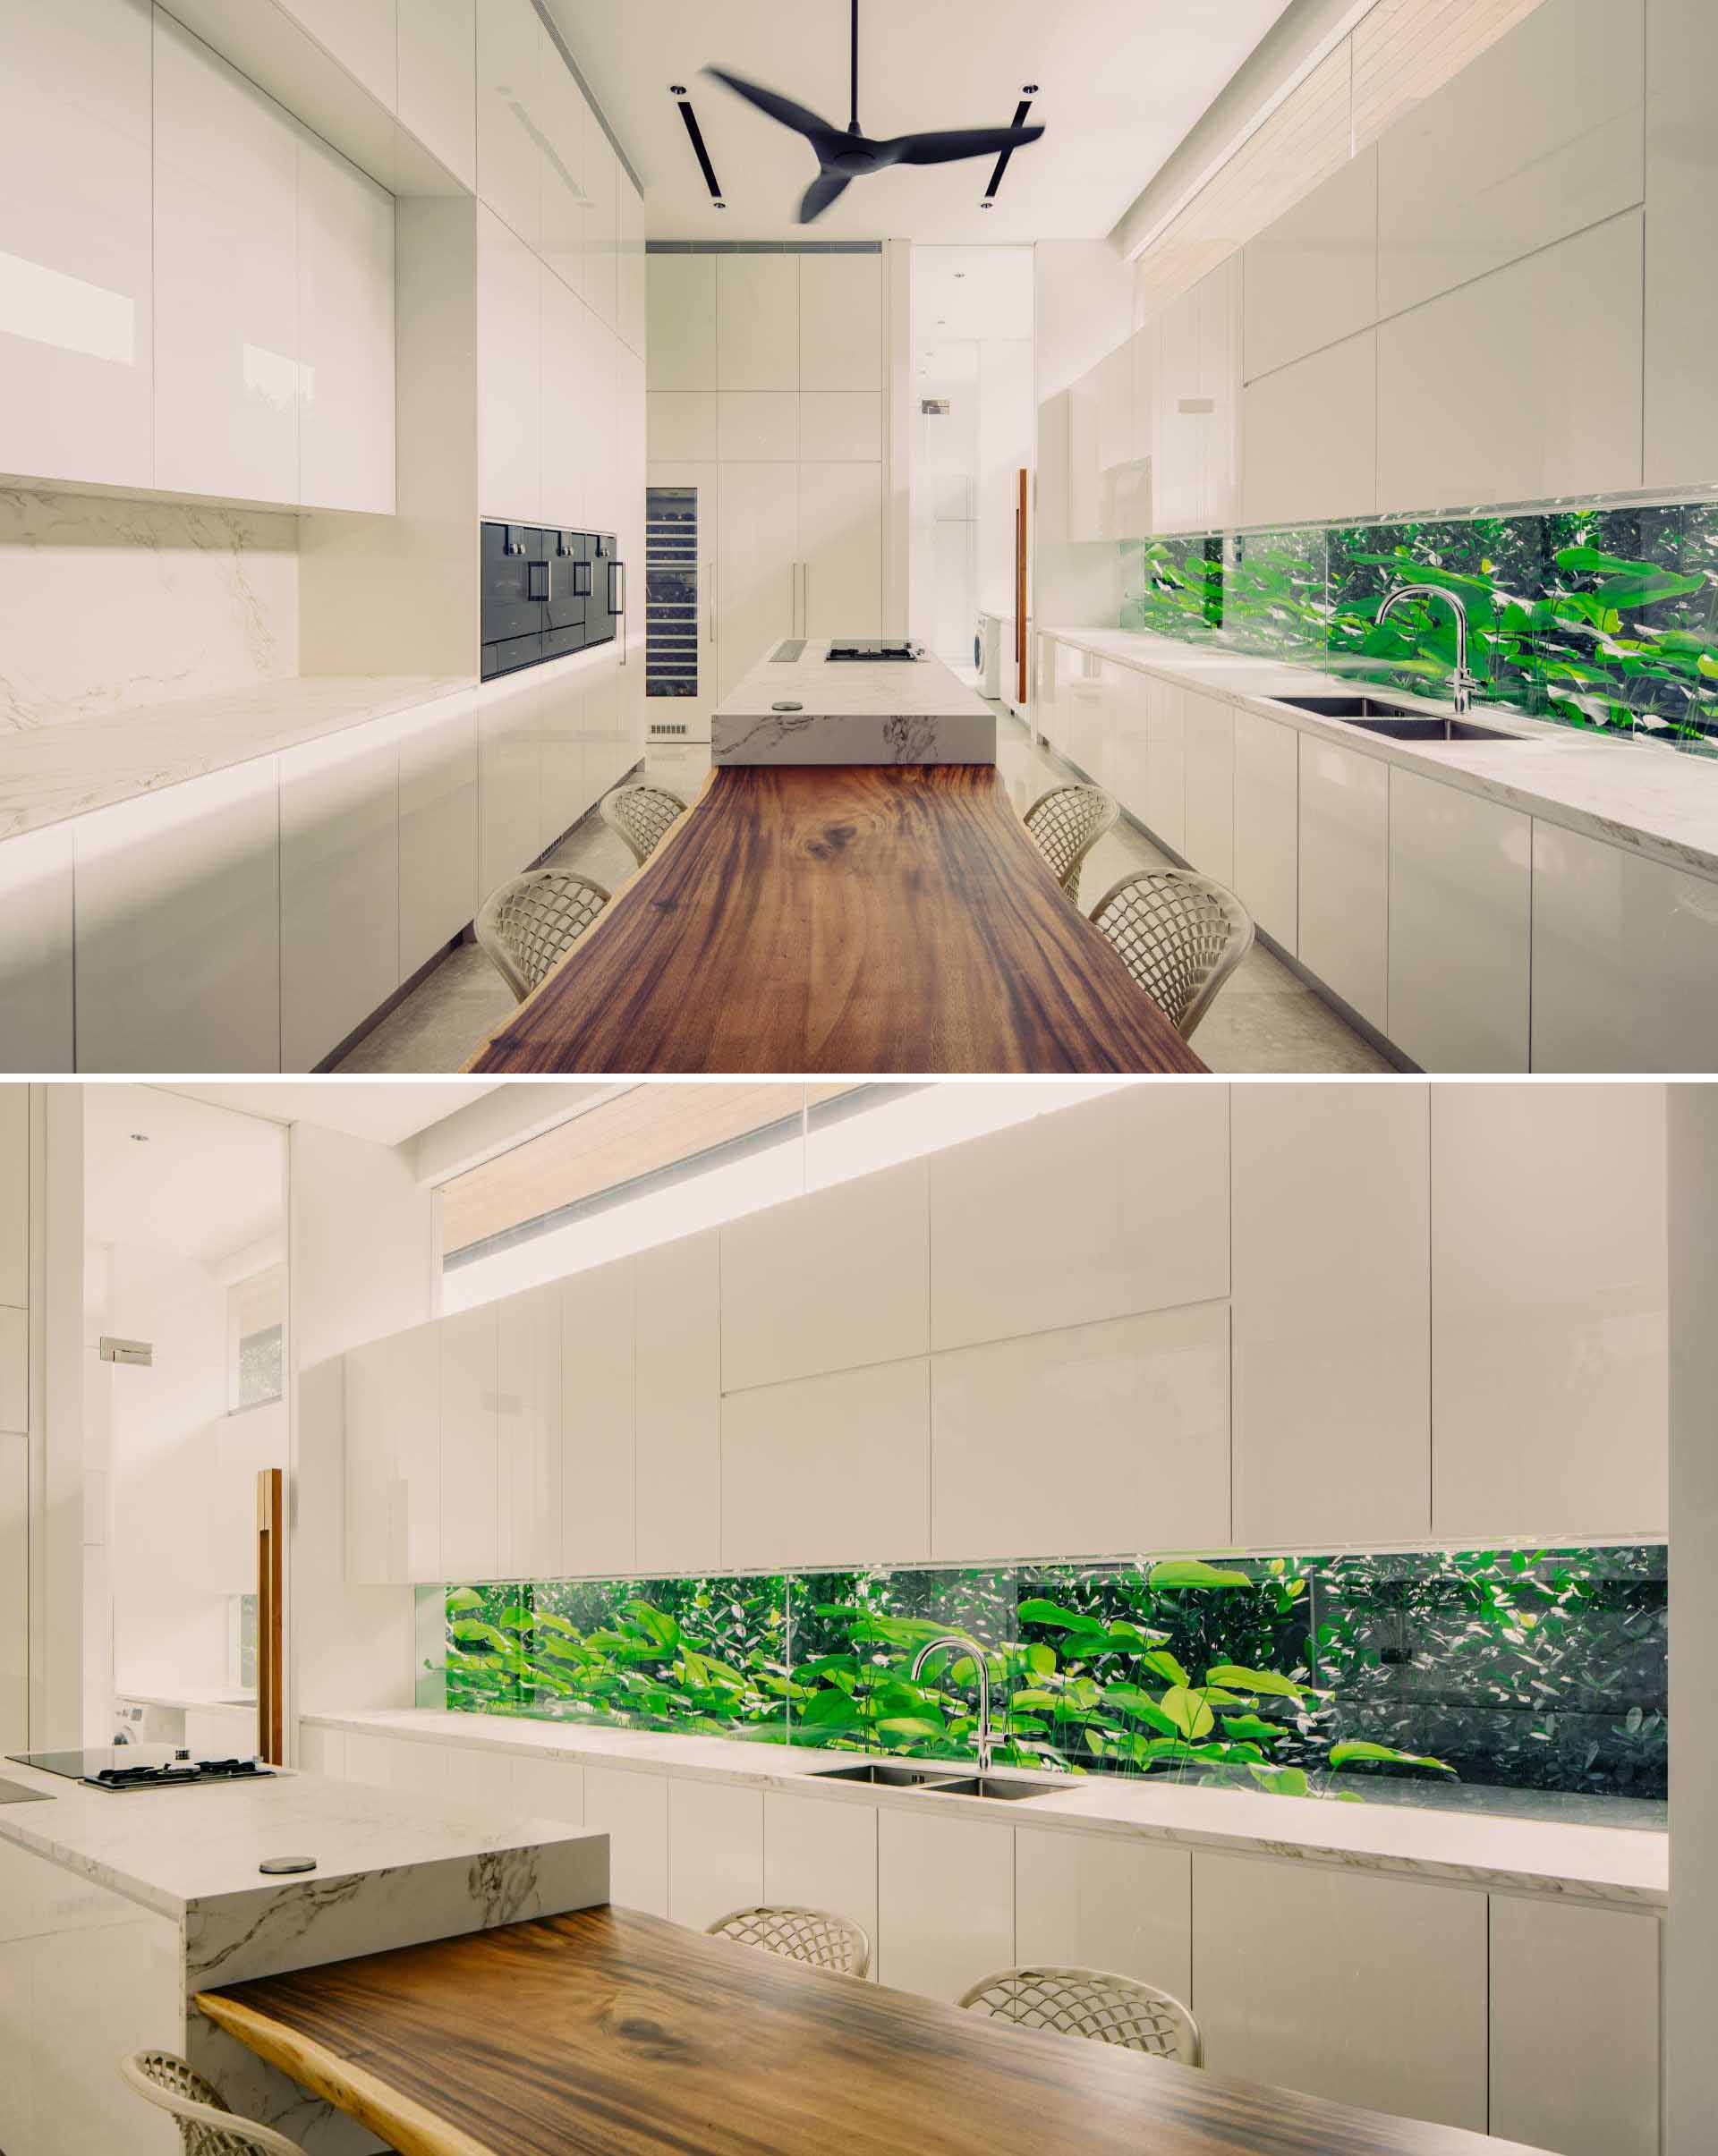 In this modern kitchen, white cabinets allow the plants seen through the long horizontal window to be the focal point.